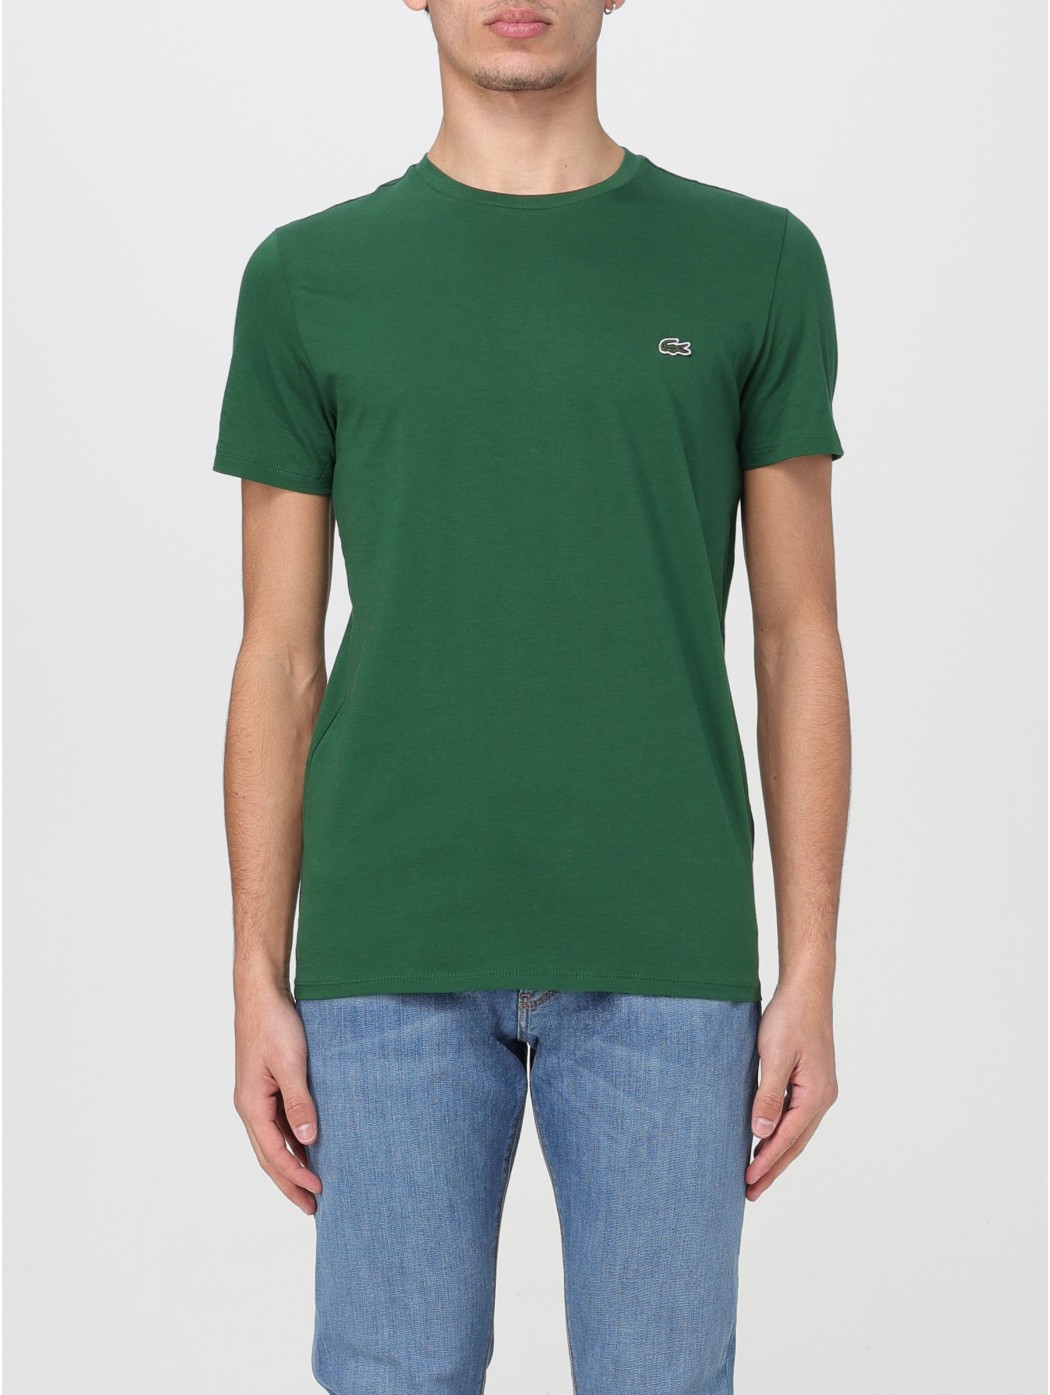 TEE LACOSTE TH6709 132